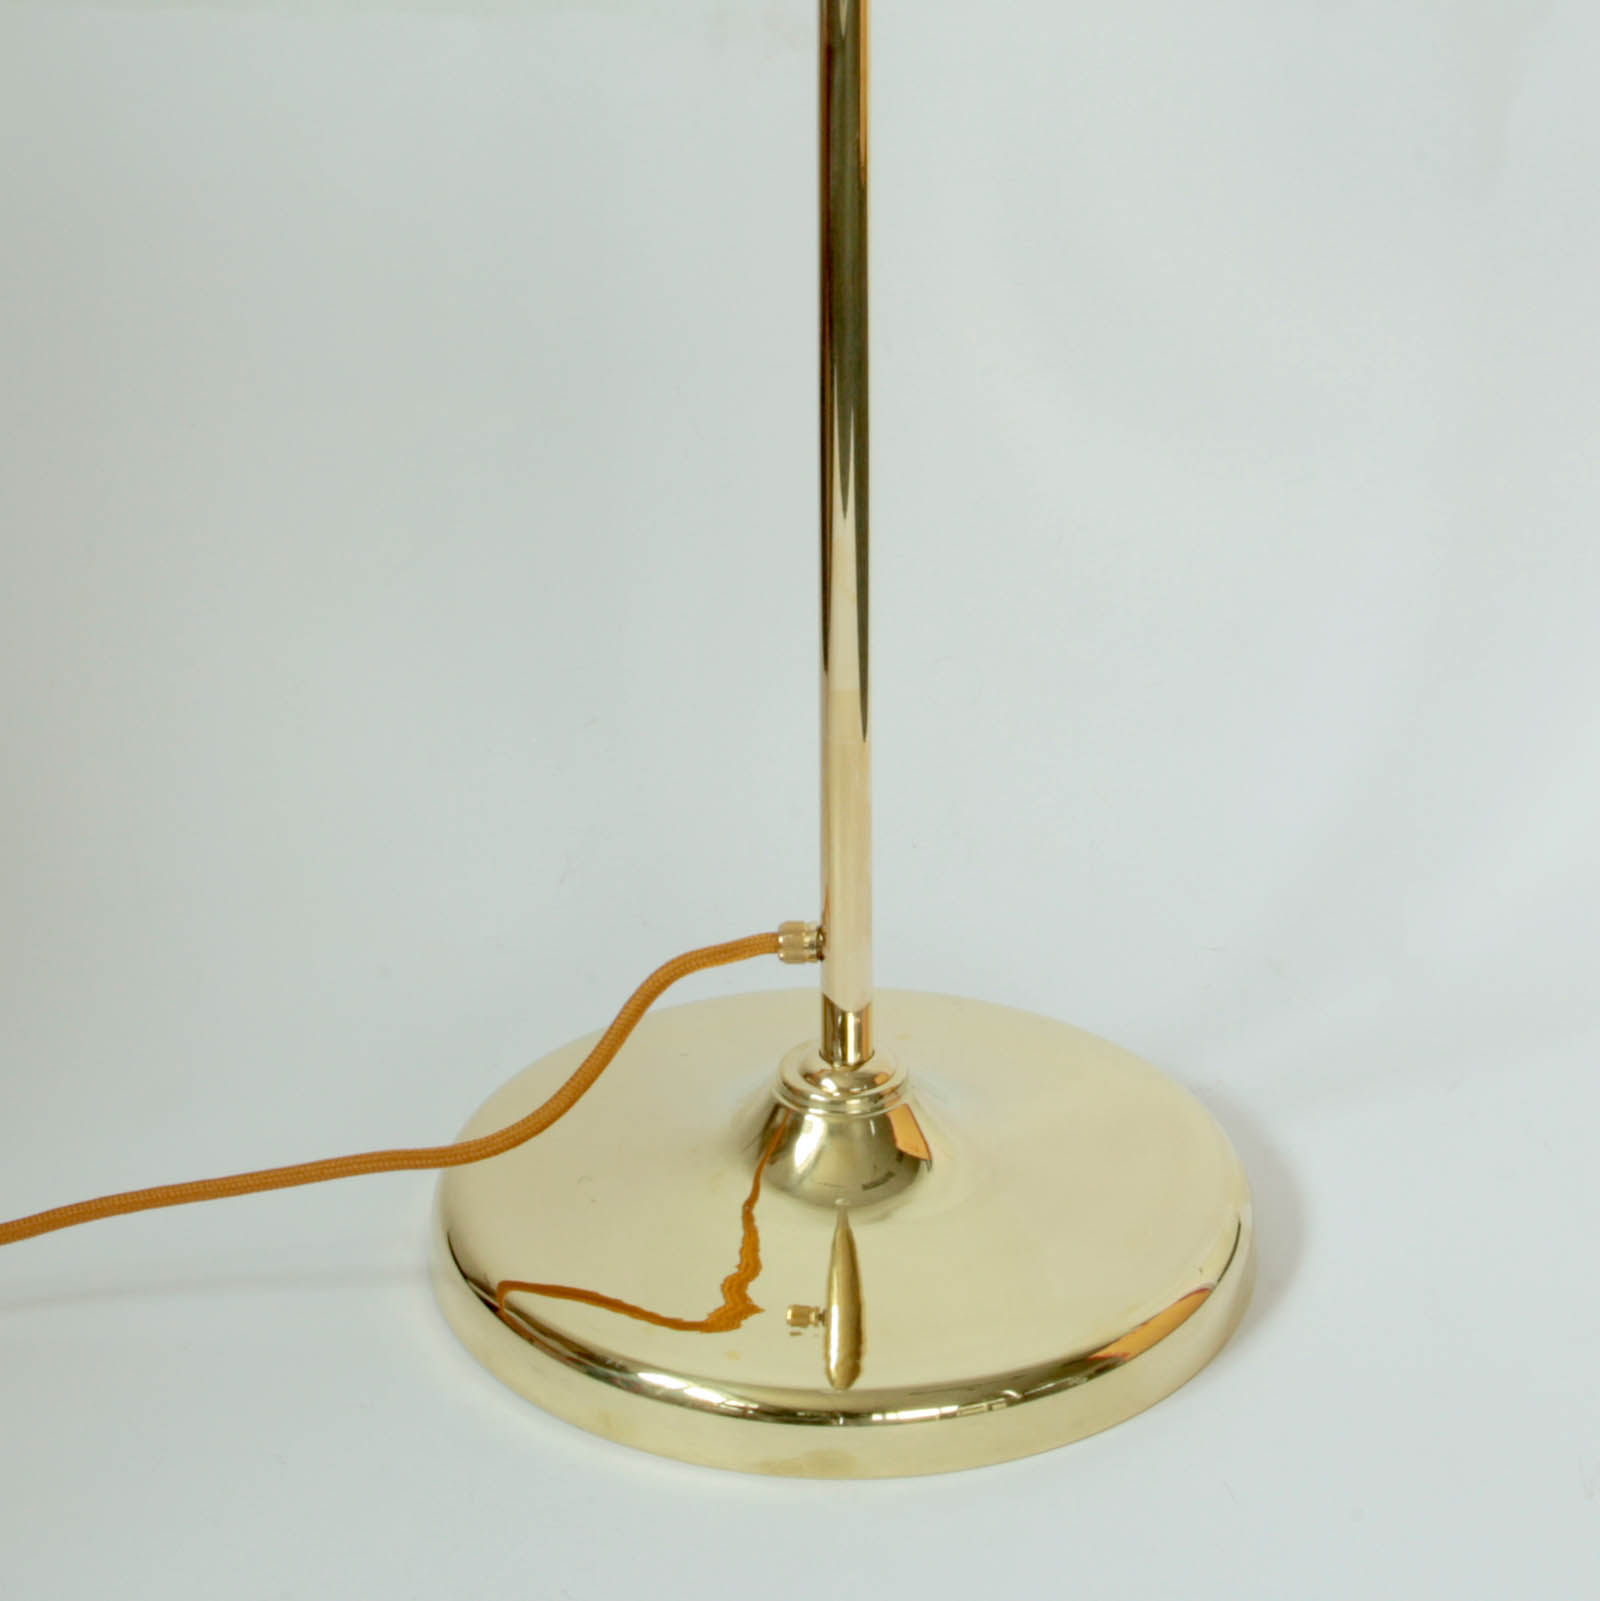 Art Deco Floor Lamp with Goblet Glass Shade: Messing poliert und lackiert